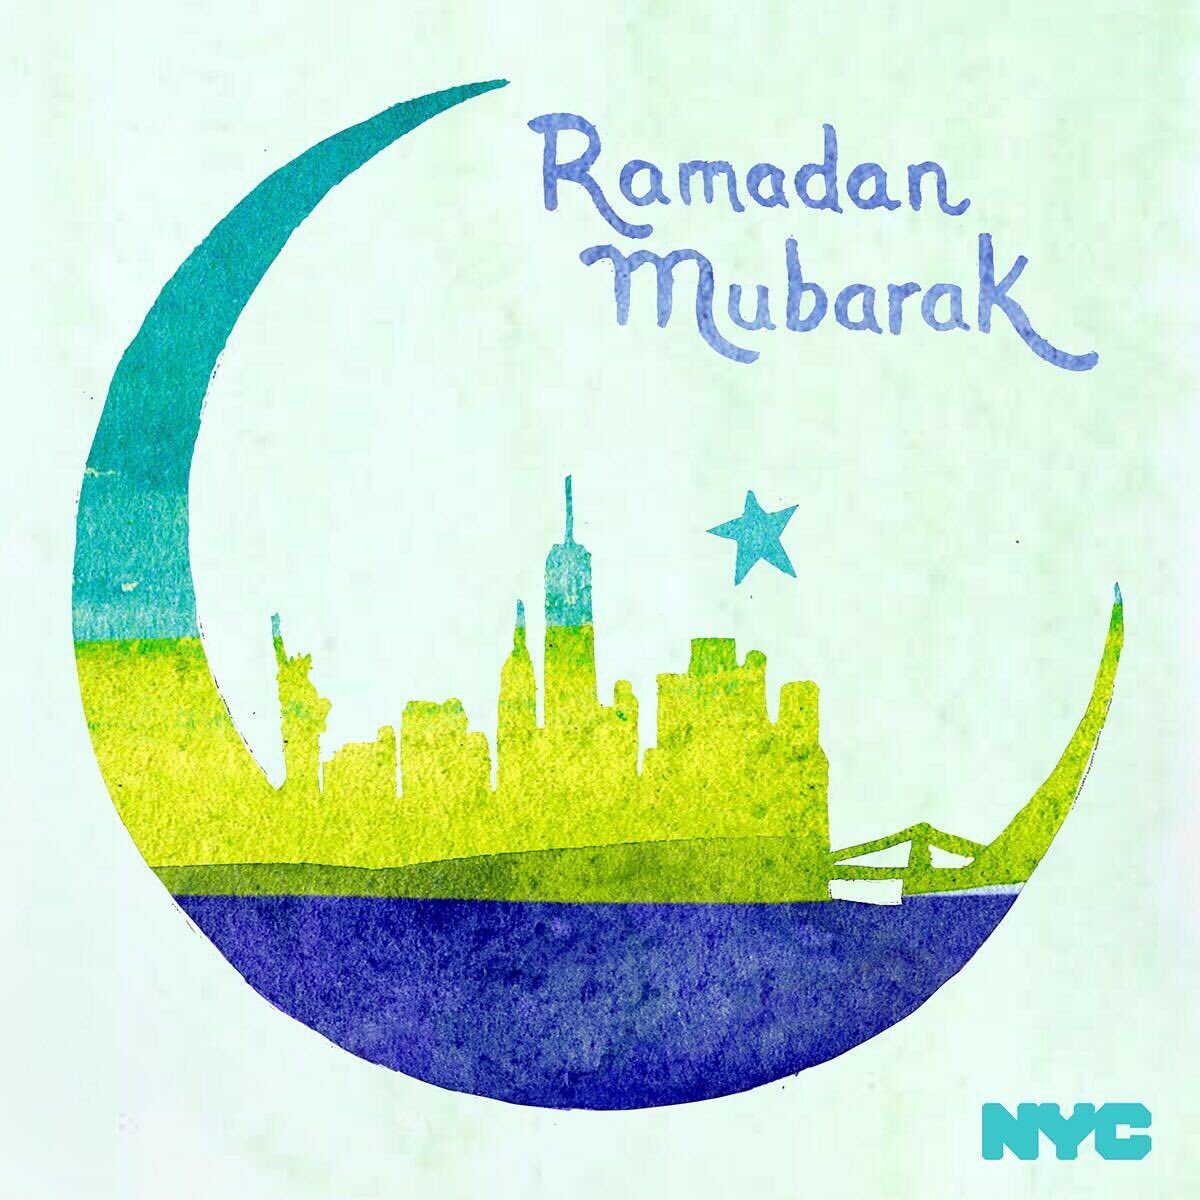  #Ramadan   is a month to reflect, to build discipline and to become closer to God. As our city continues to confront the COVID-19 crisis, every New Yorker can learn from such a profound act of faith. Ramadan Mubarak to all of our neighbors beginning their fast.